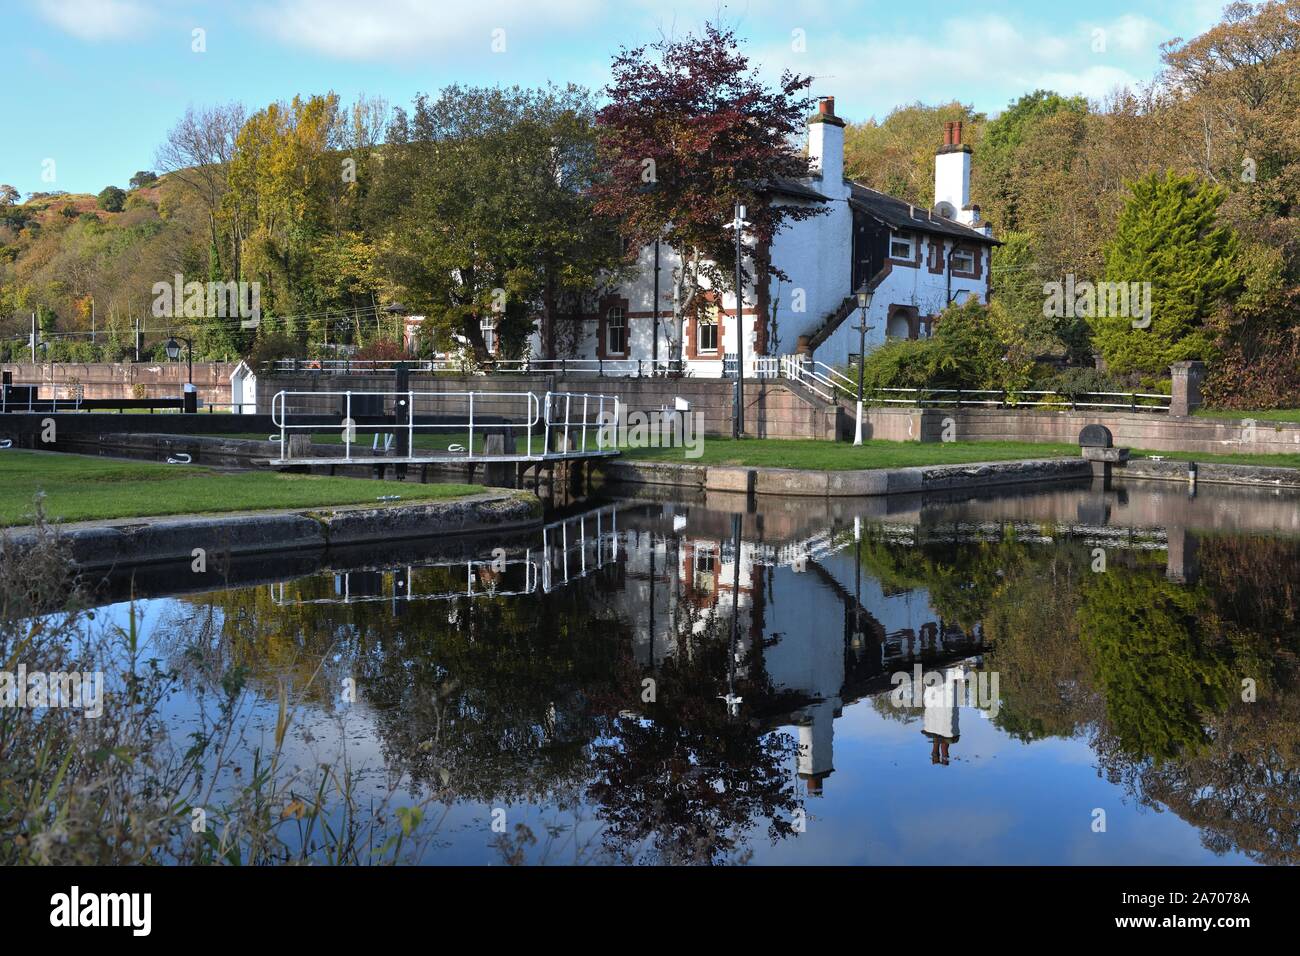 A lock on the Forth and Clyde canal at Bowling, Scotland, UK, Europe Stock Photo